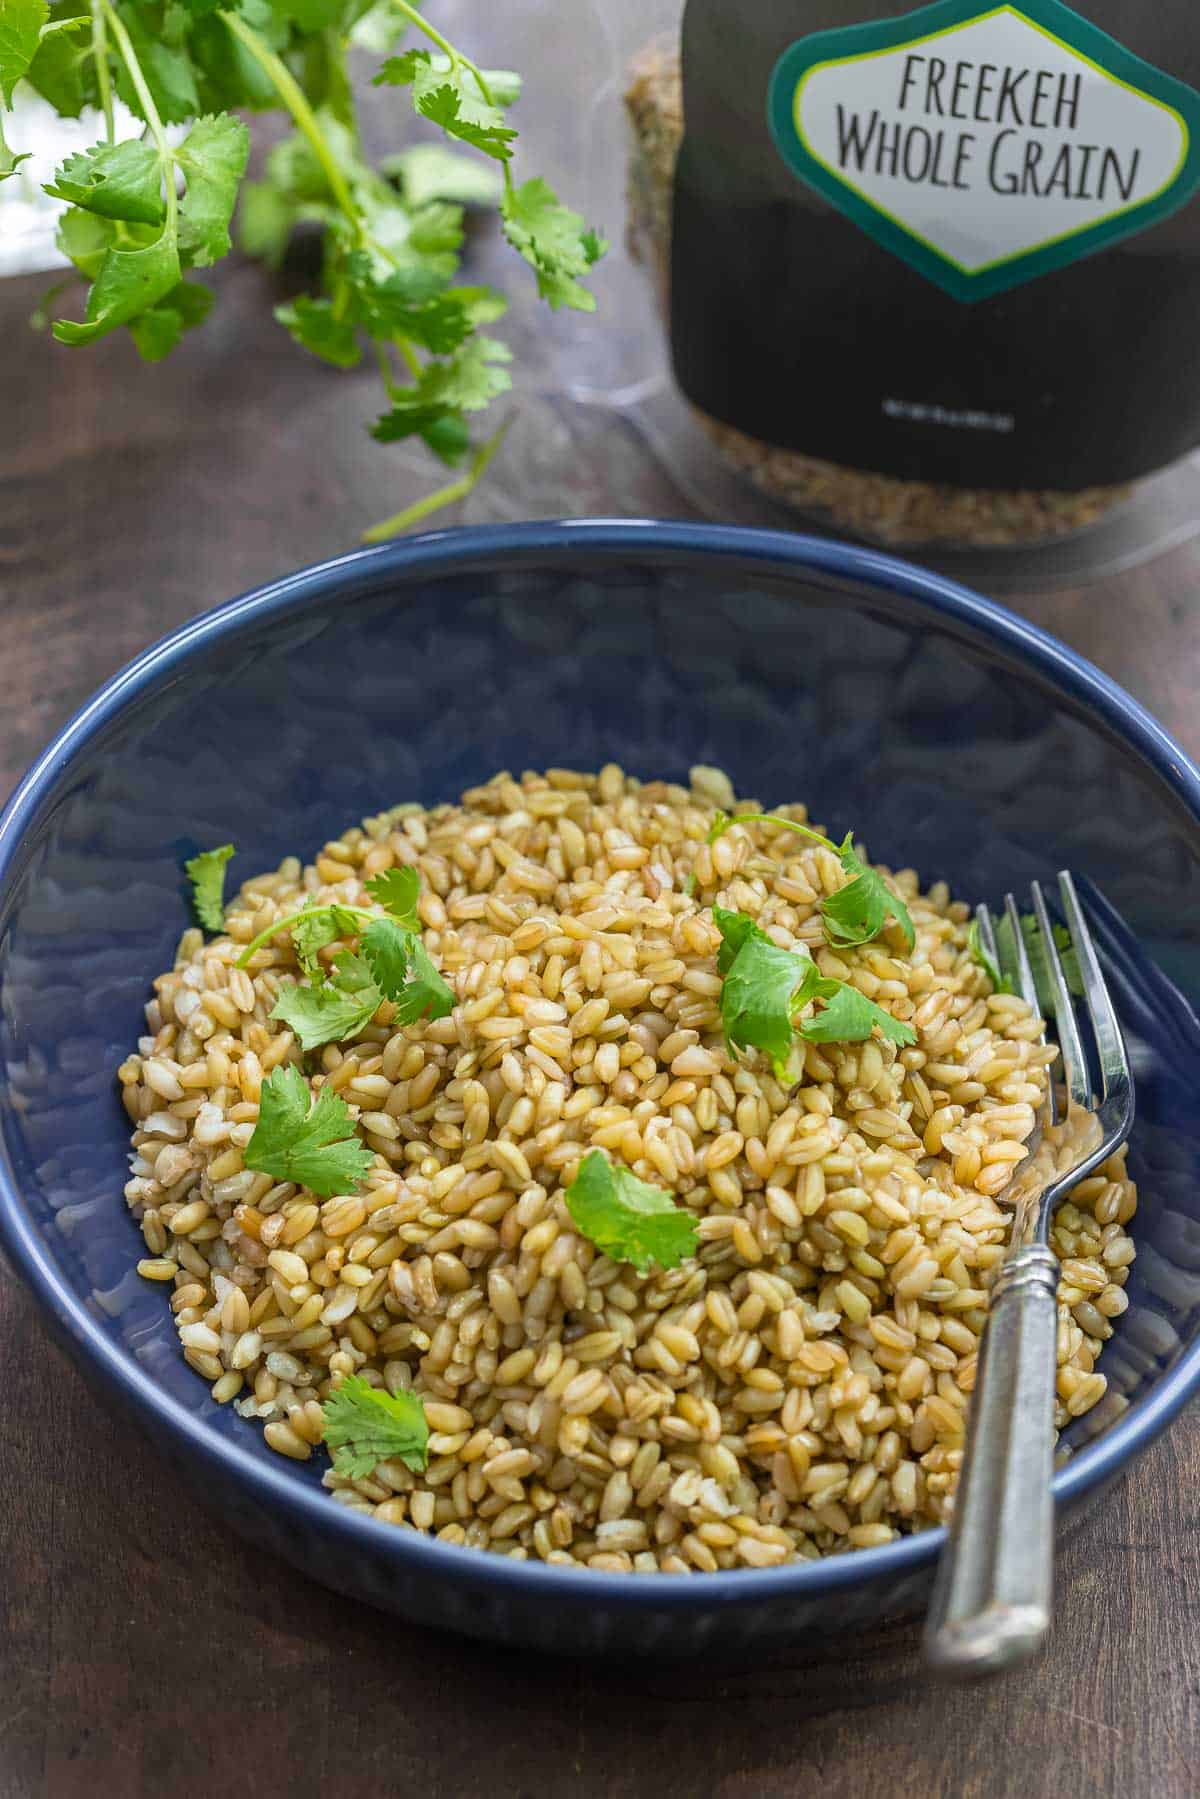 cooked freekeh in a bowl sprinkled with fresh parsley. The Mediterranean Dish wholegrain freekeh in the background.